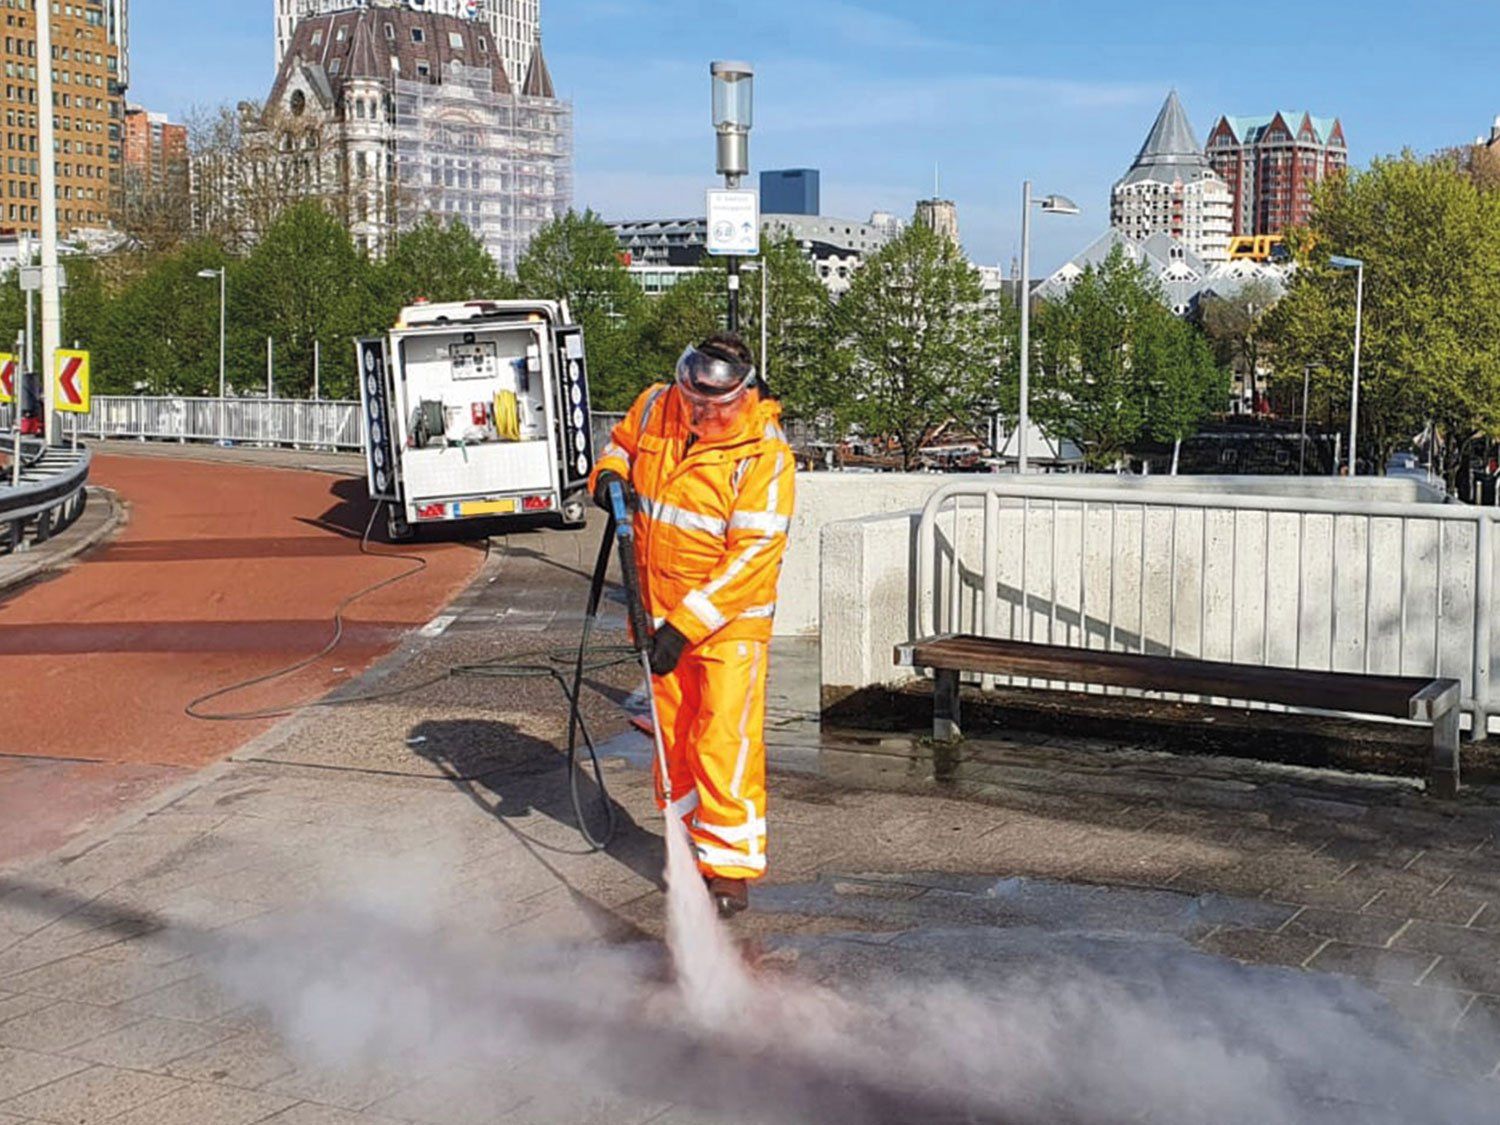 Meclean SteamPLUS Saves thousands of euros per year